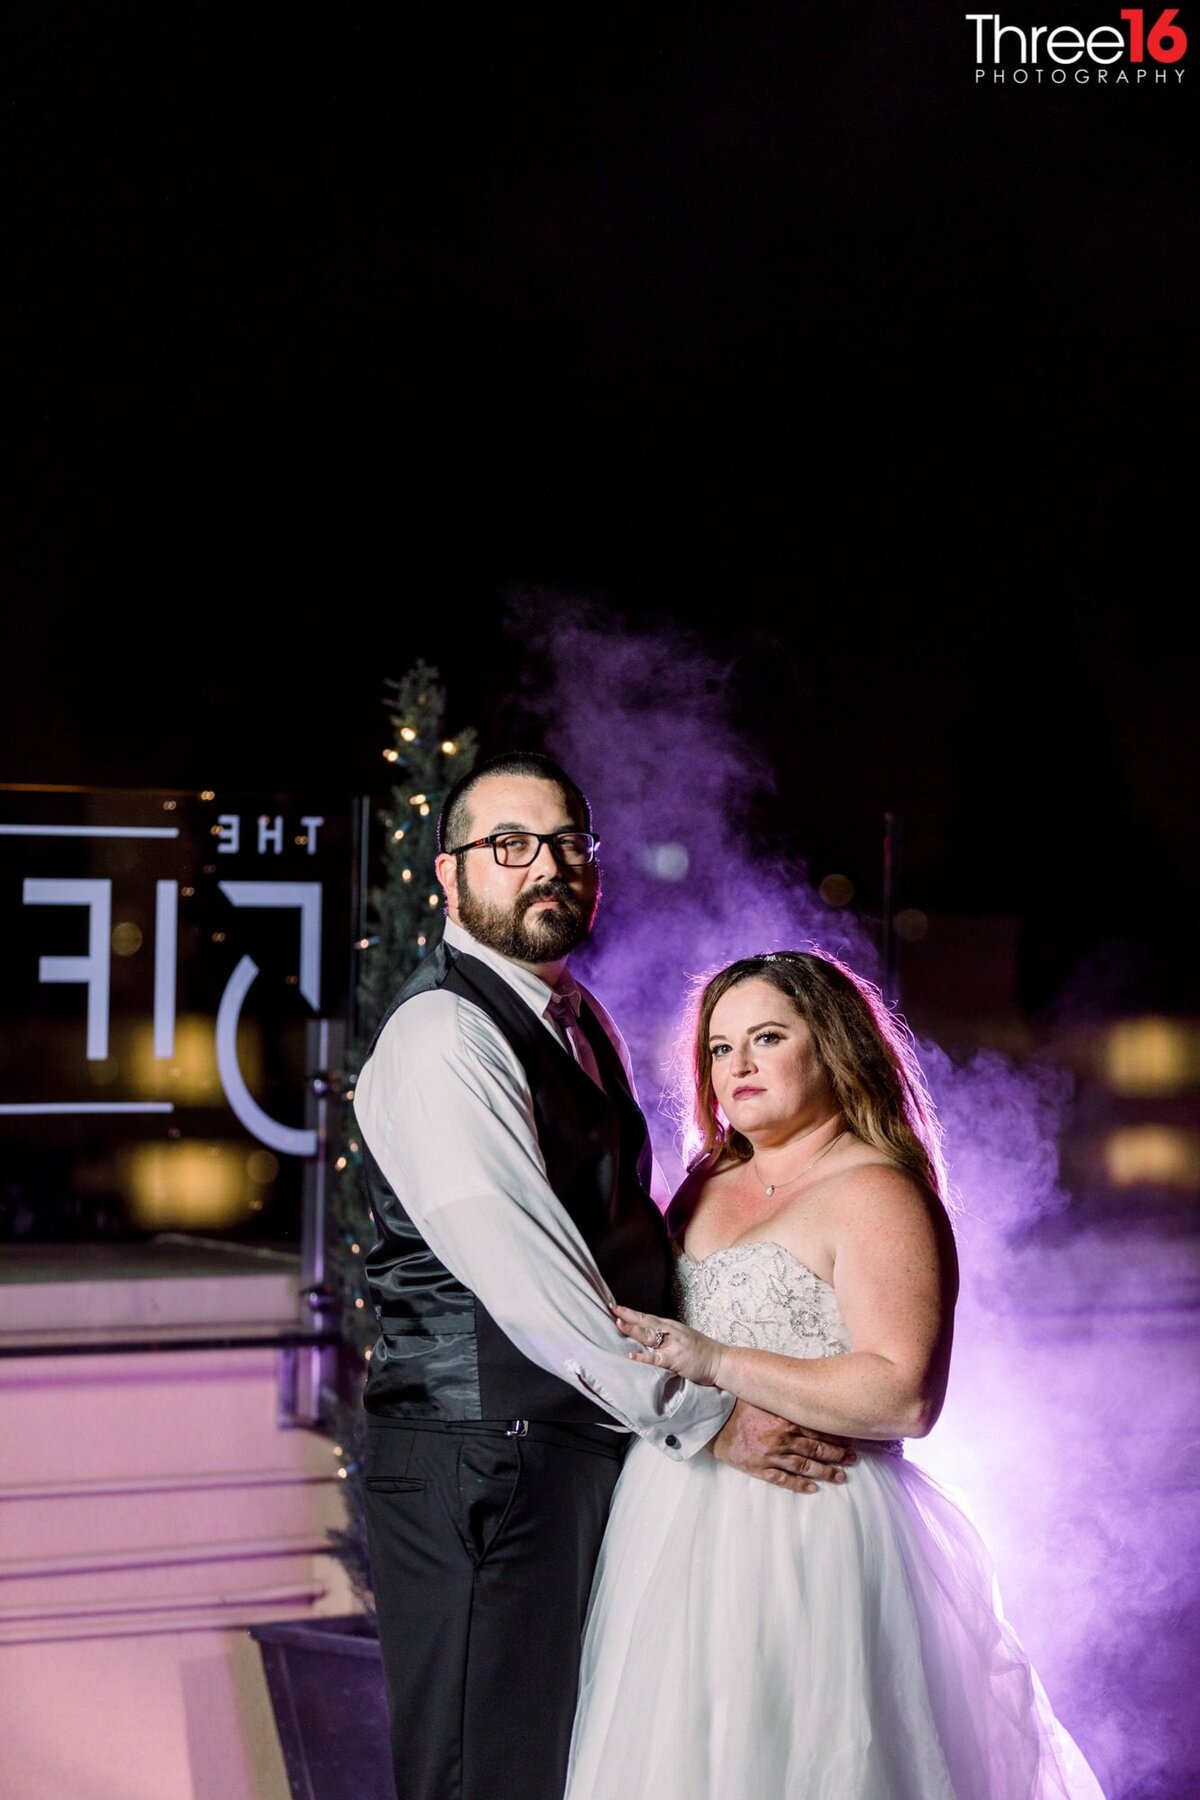 Newly married couple pose together under the evening sky with purple haze behind them